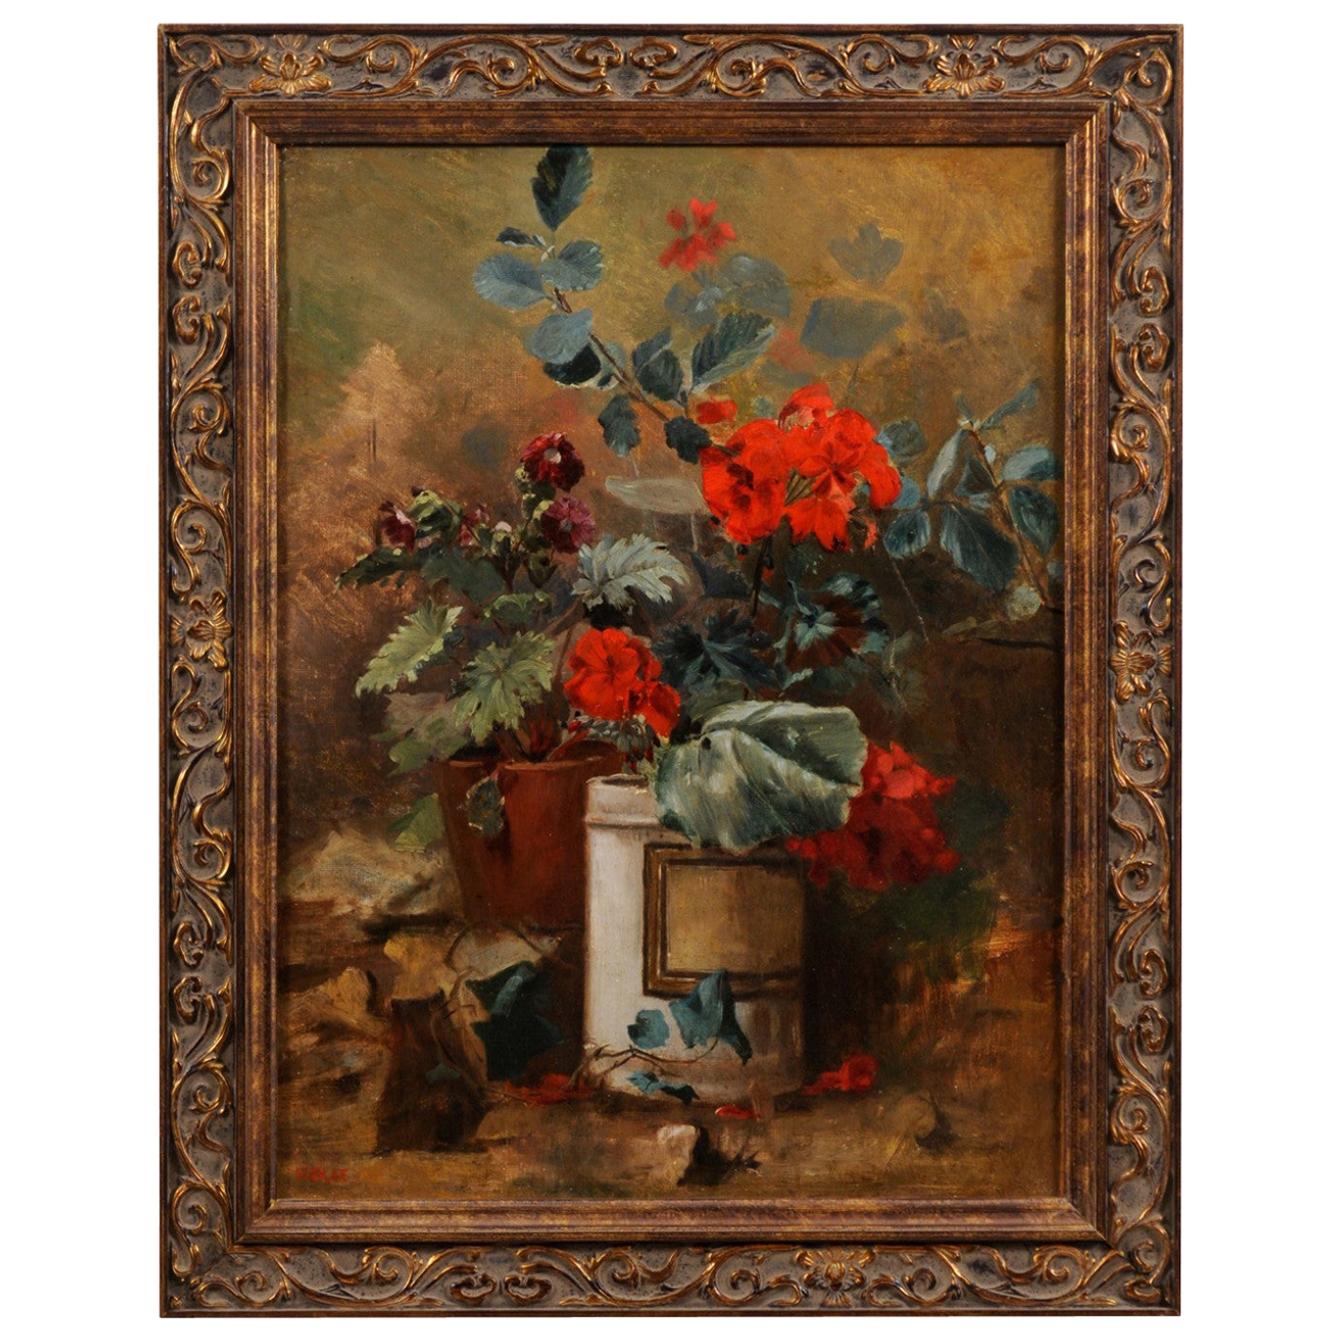 French 19th Century Framed Oil on Canvas Floral Painting Signed Murat